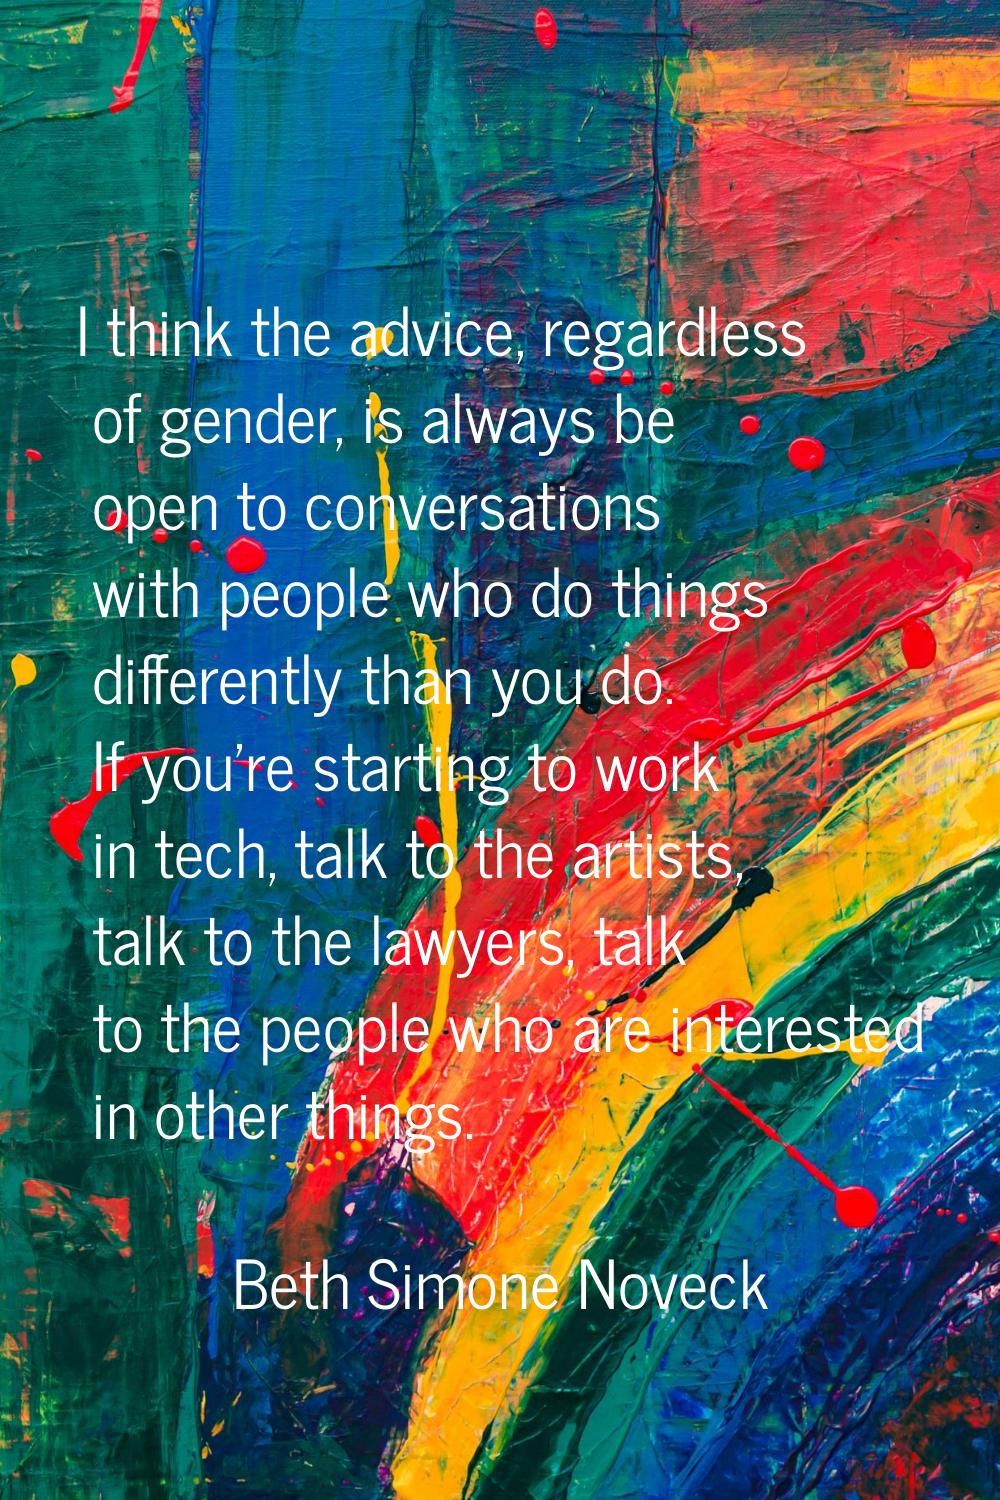 I think the advice, regardless of gender, is always be open to conversations with people who do thi